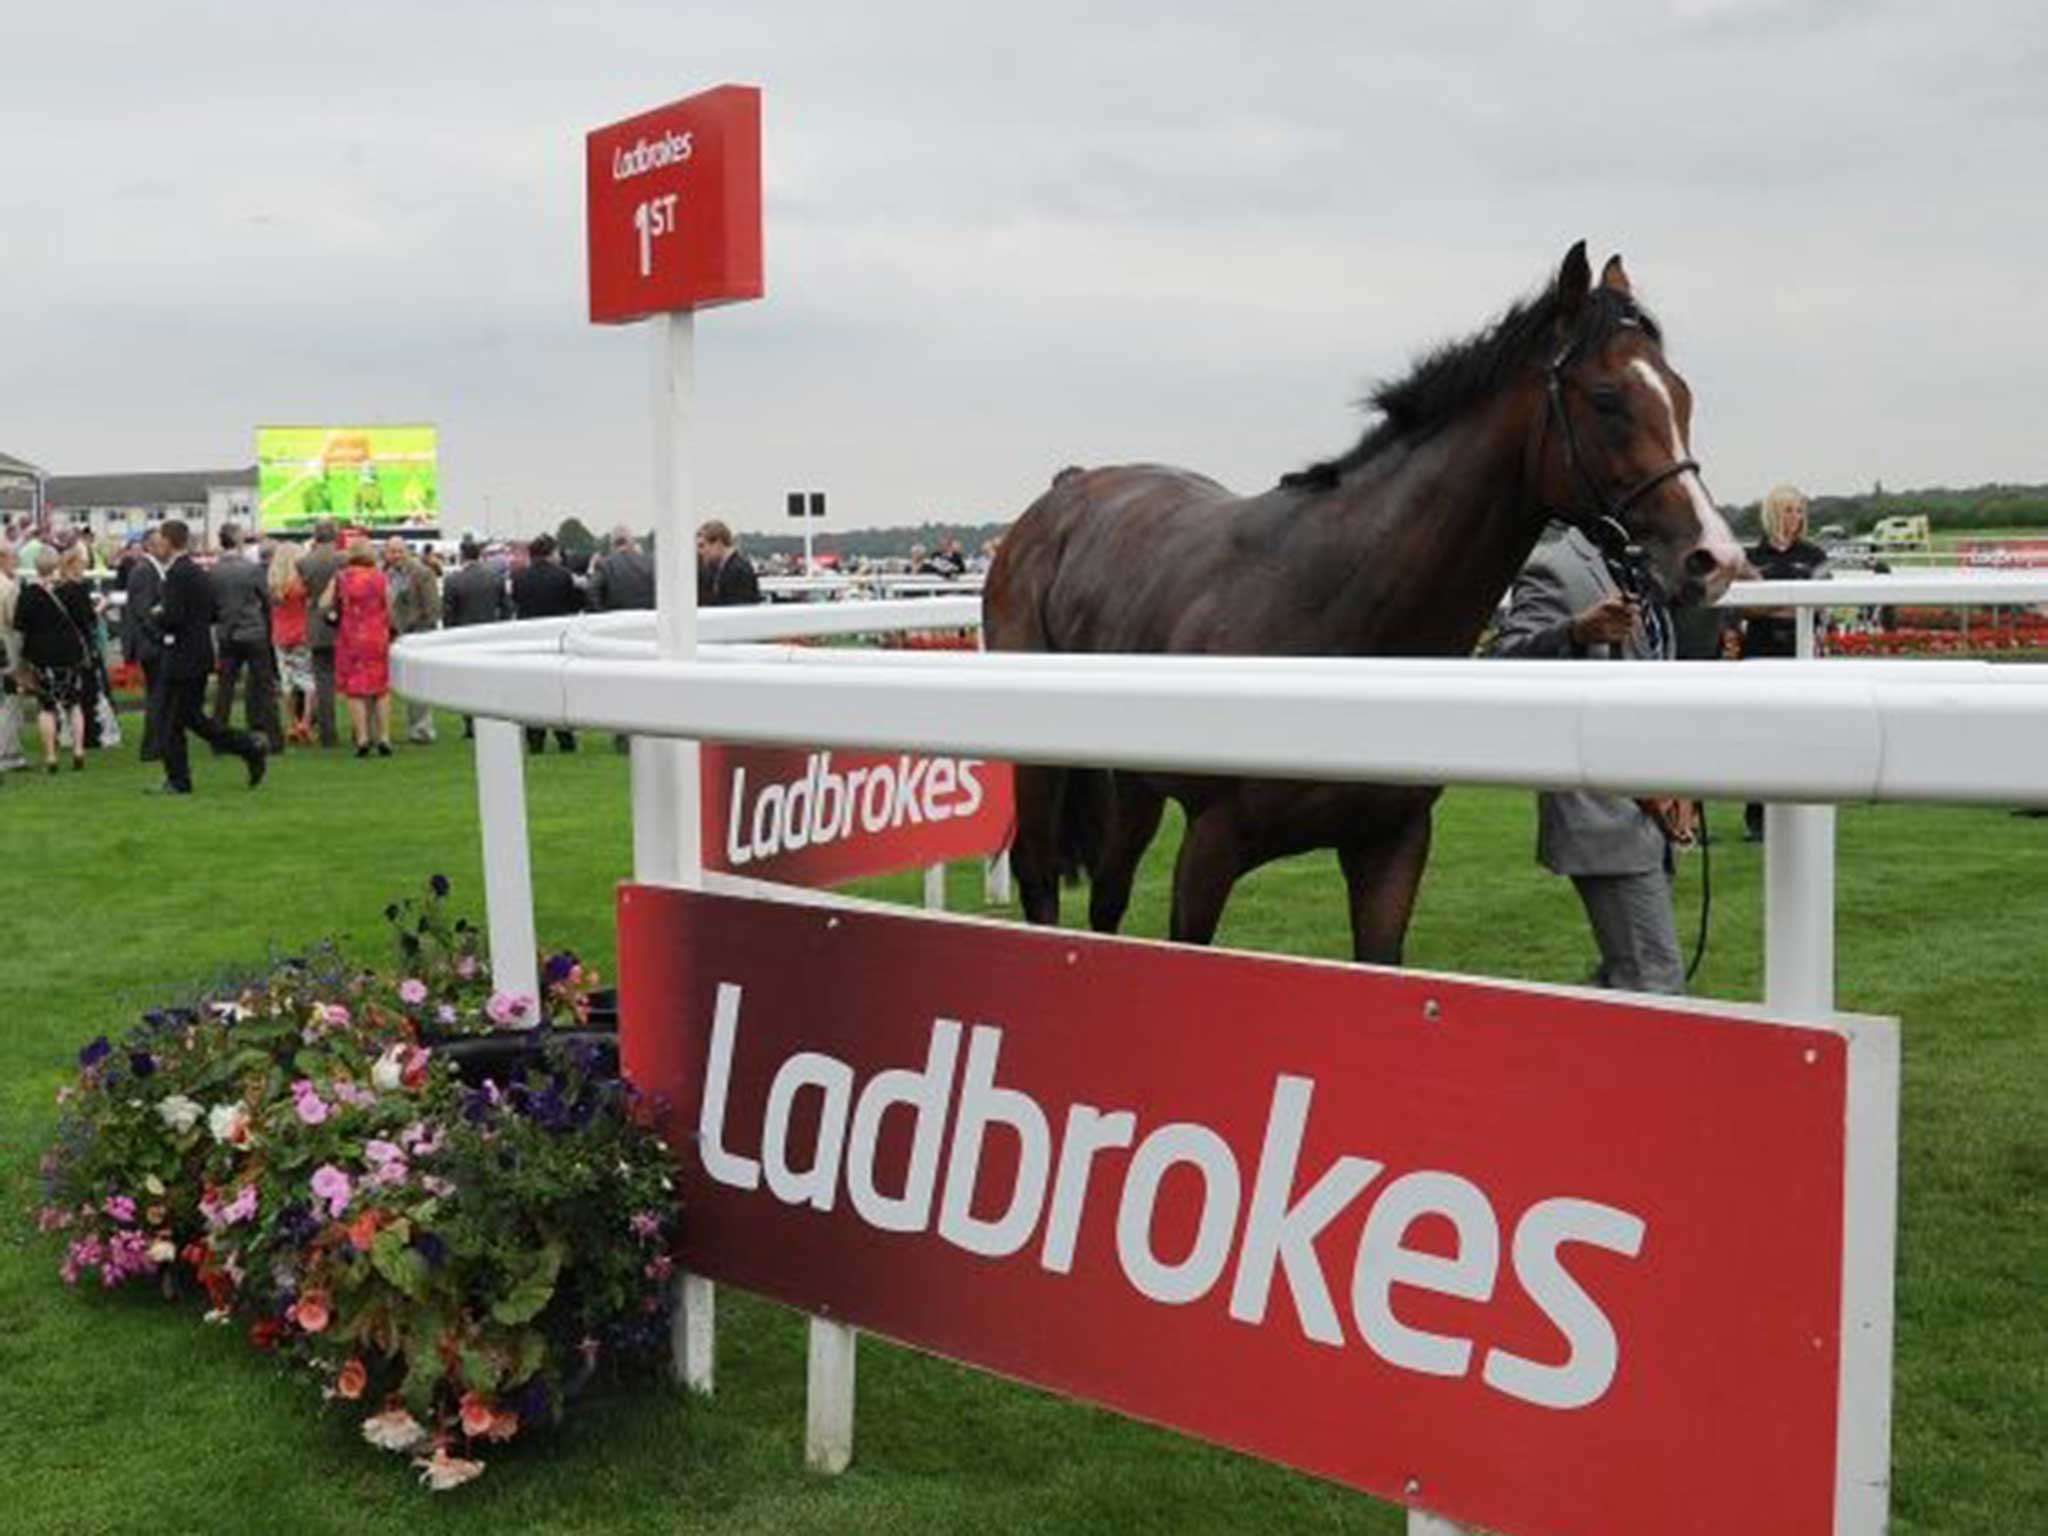 There has been a frenzy of takeover activity in the bookies sector as firms respond to tax hikes and regulation